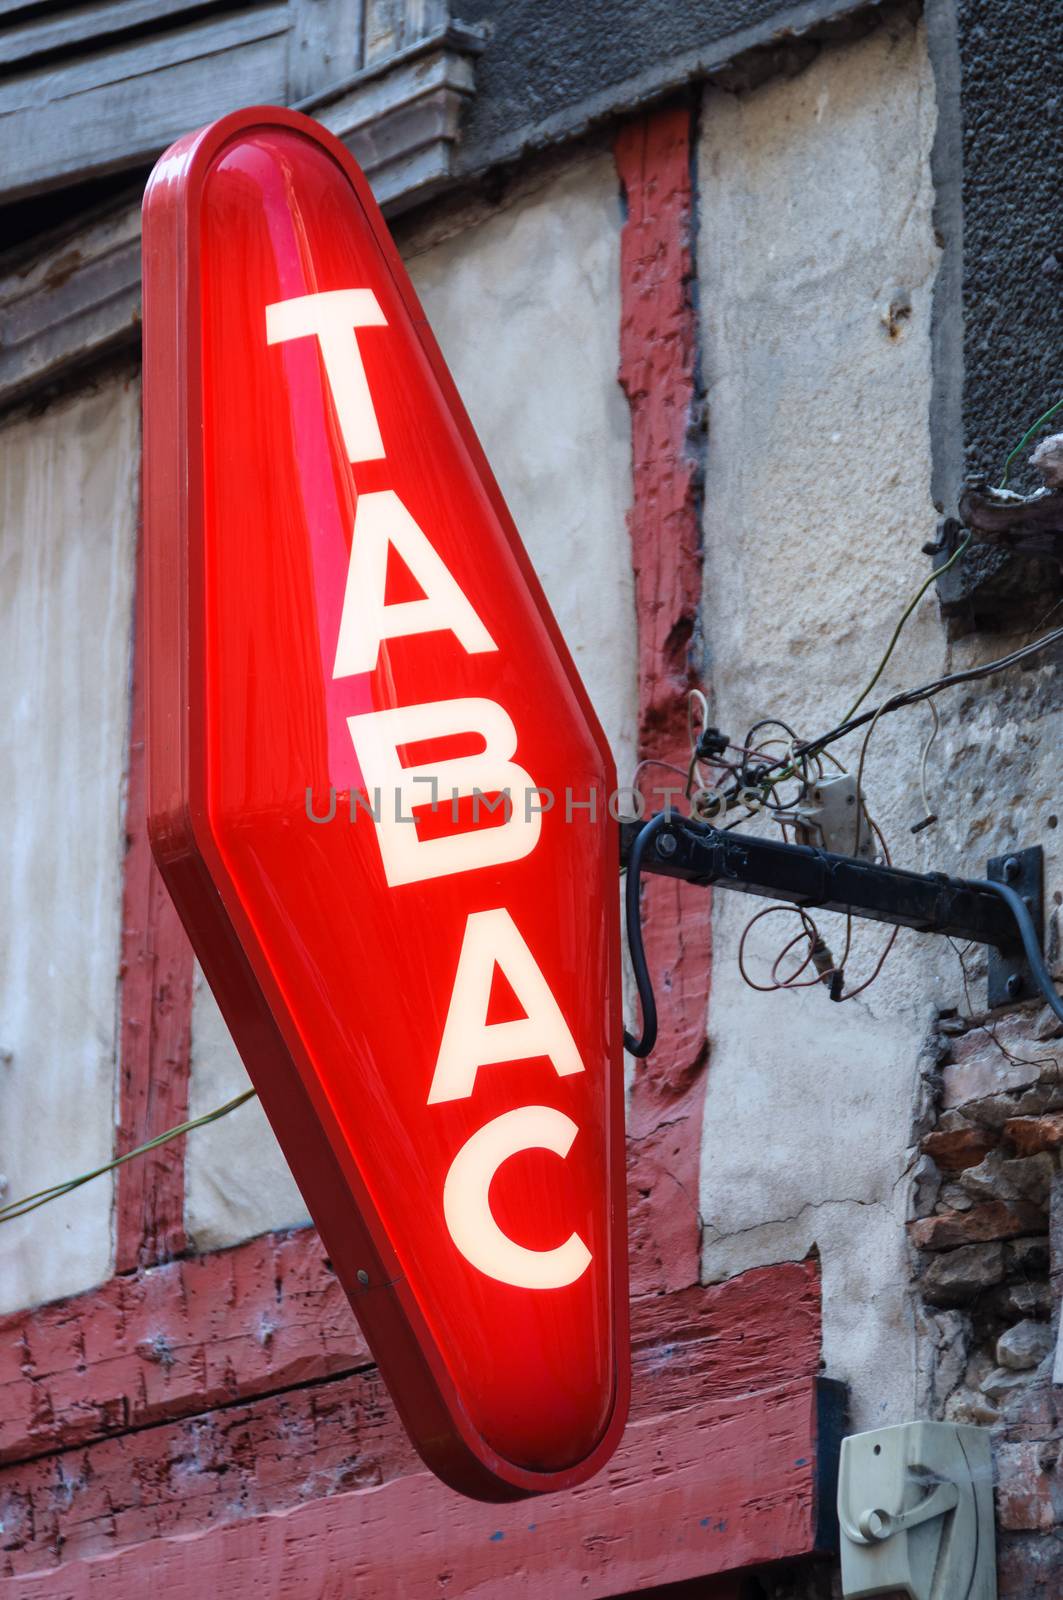 French tobacconist sign by dutourdumonde